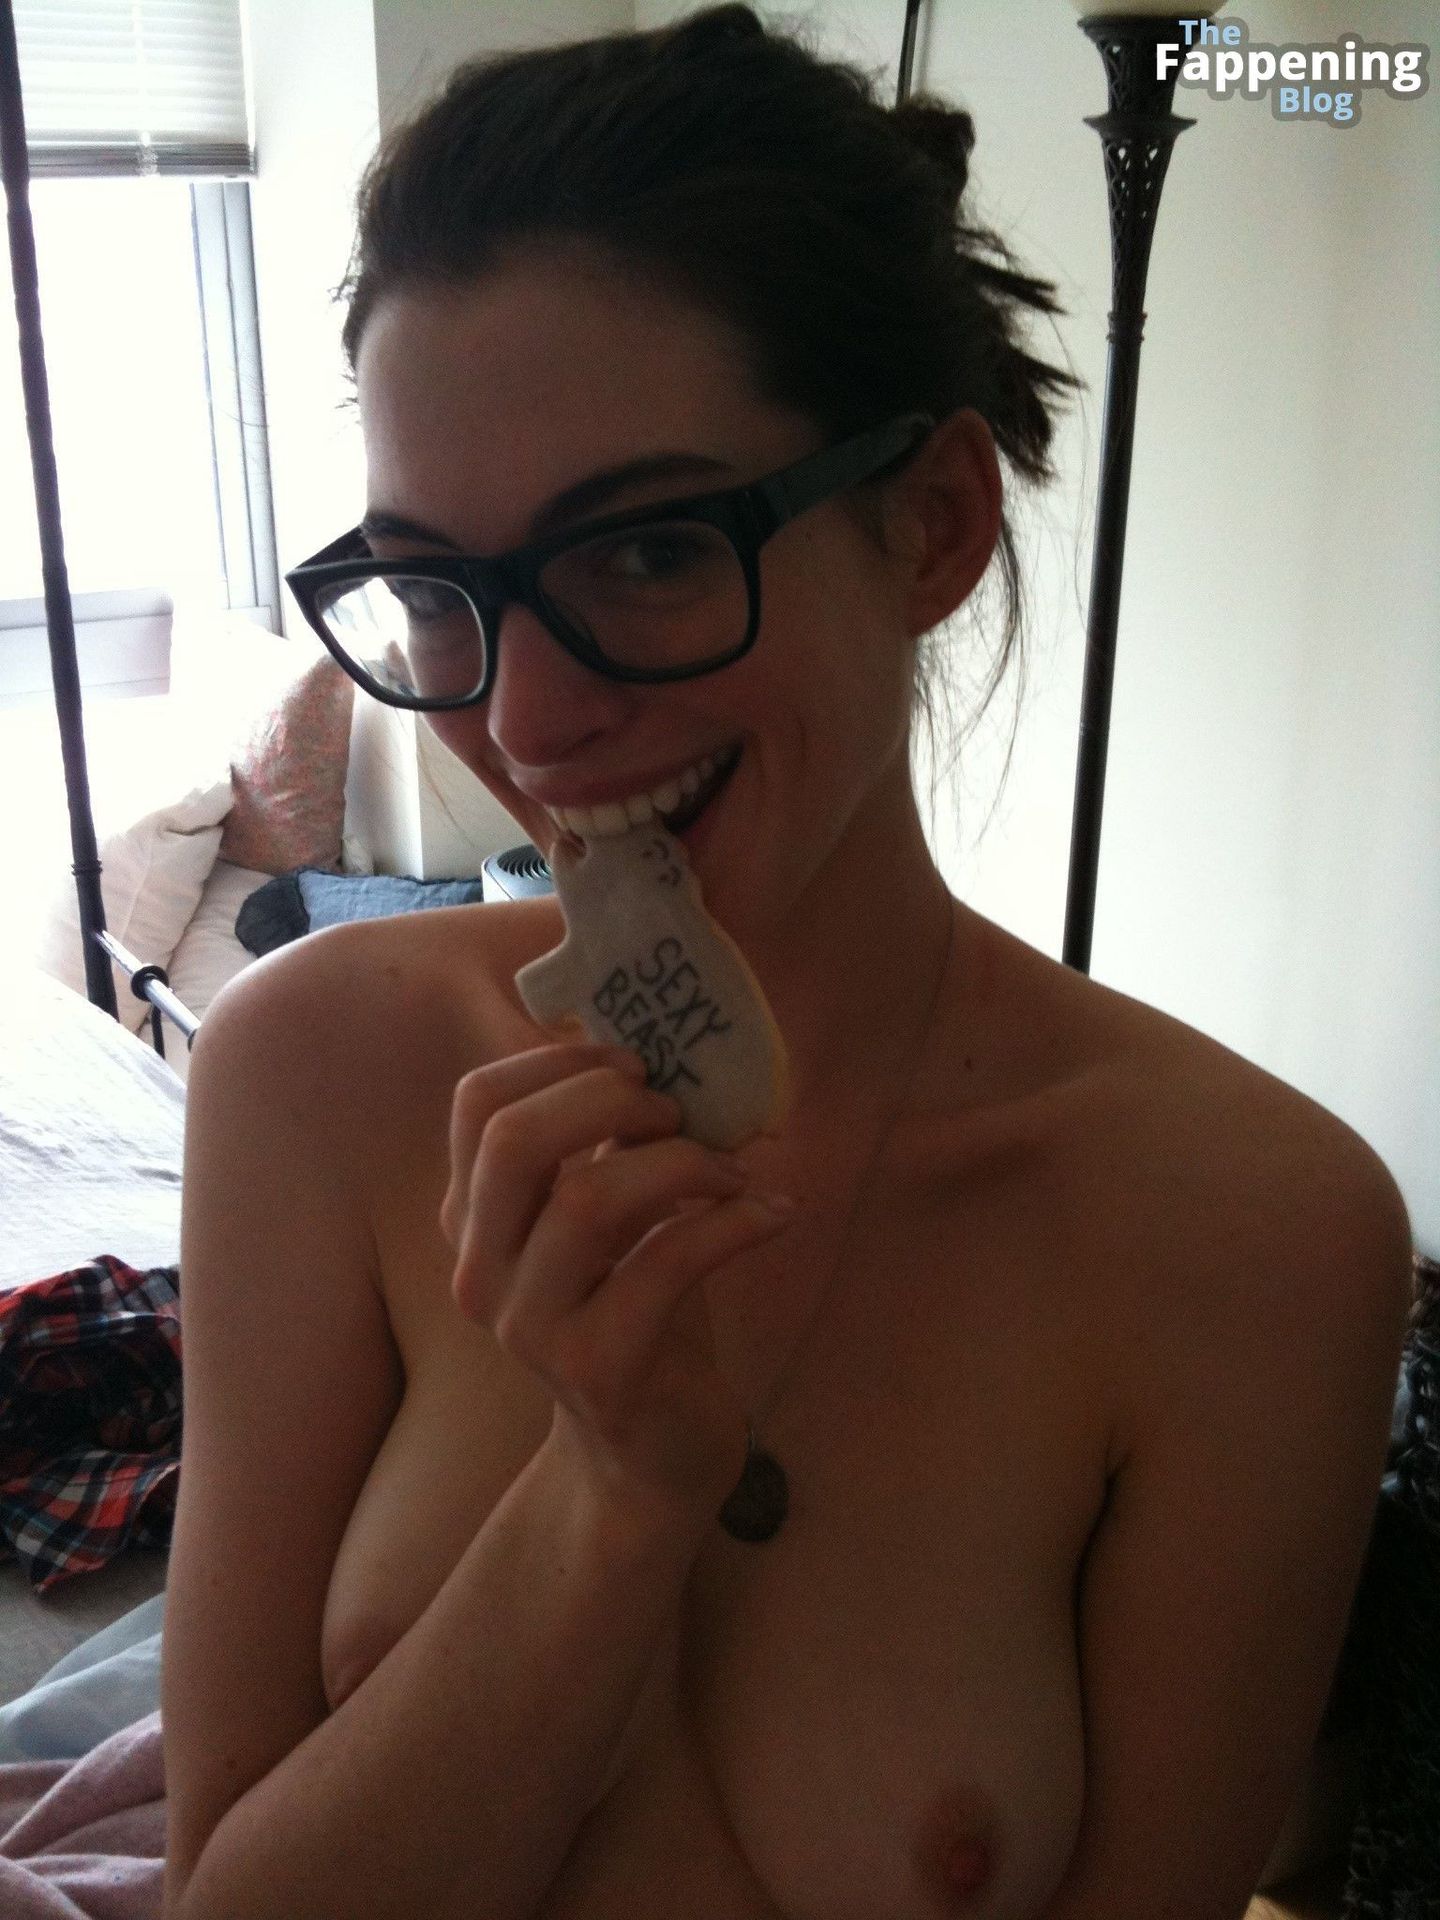 Anne-Hathaway-Nude-TheFappening-Blog-4.jpg